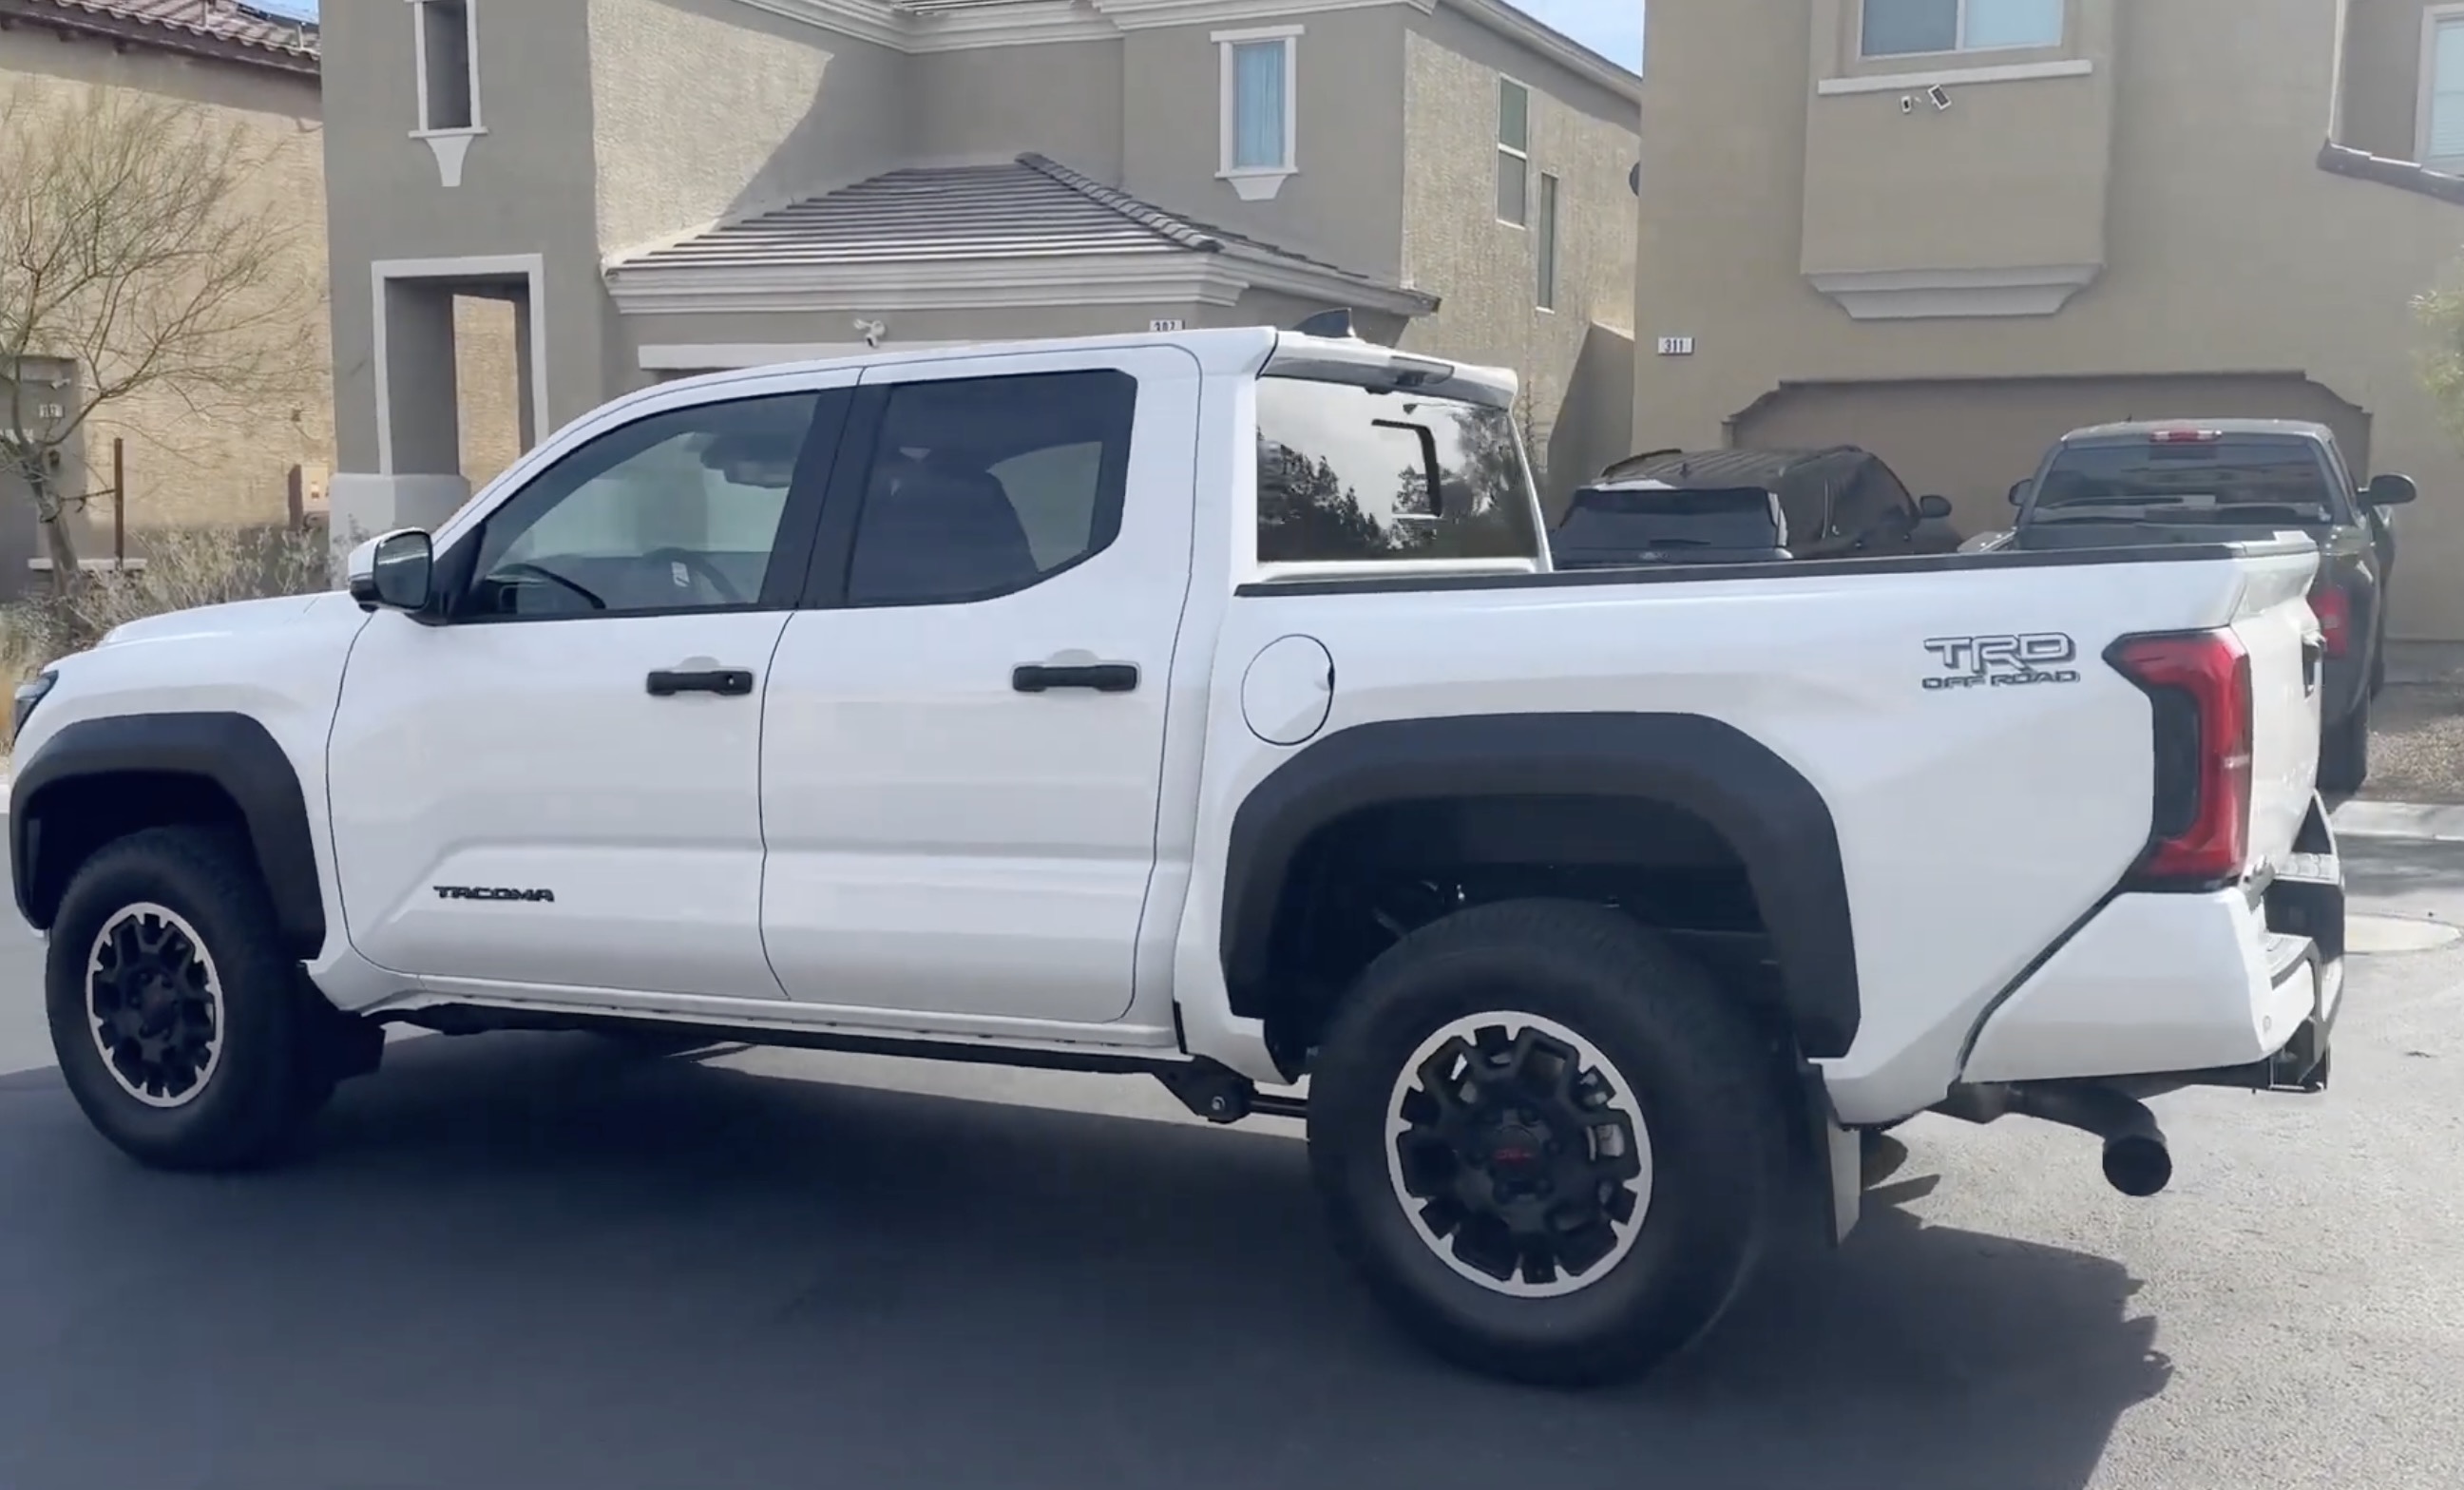 2024 Tacoma Official ICE CAP 2024 Tacoma Thread (4th Gen) 2024 tacoma 15%  40% window tint ceramic before & after